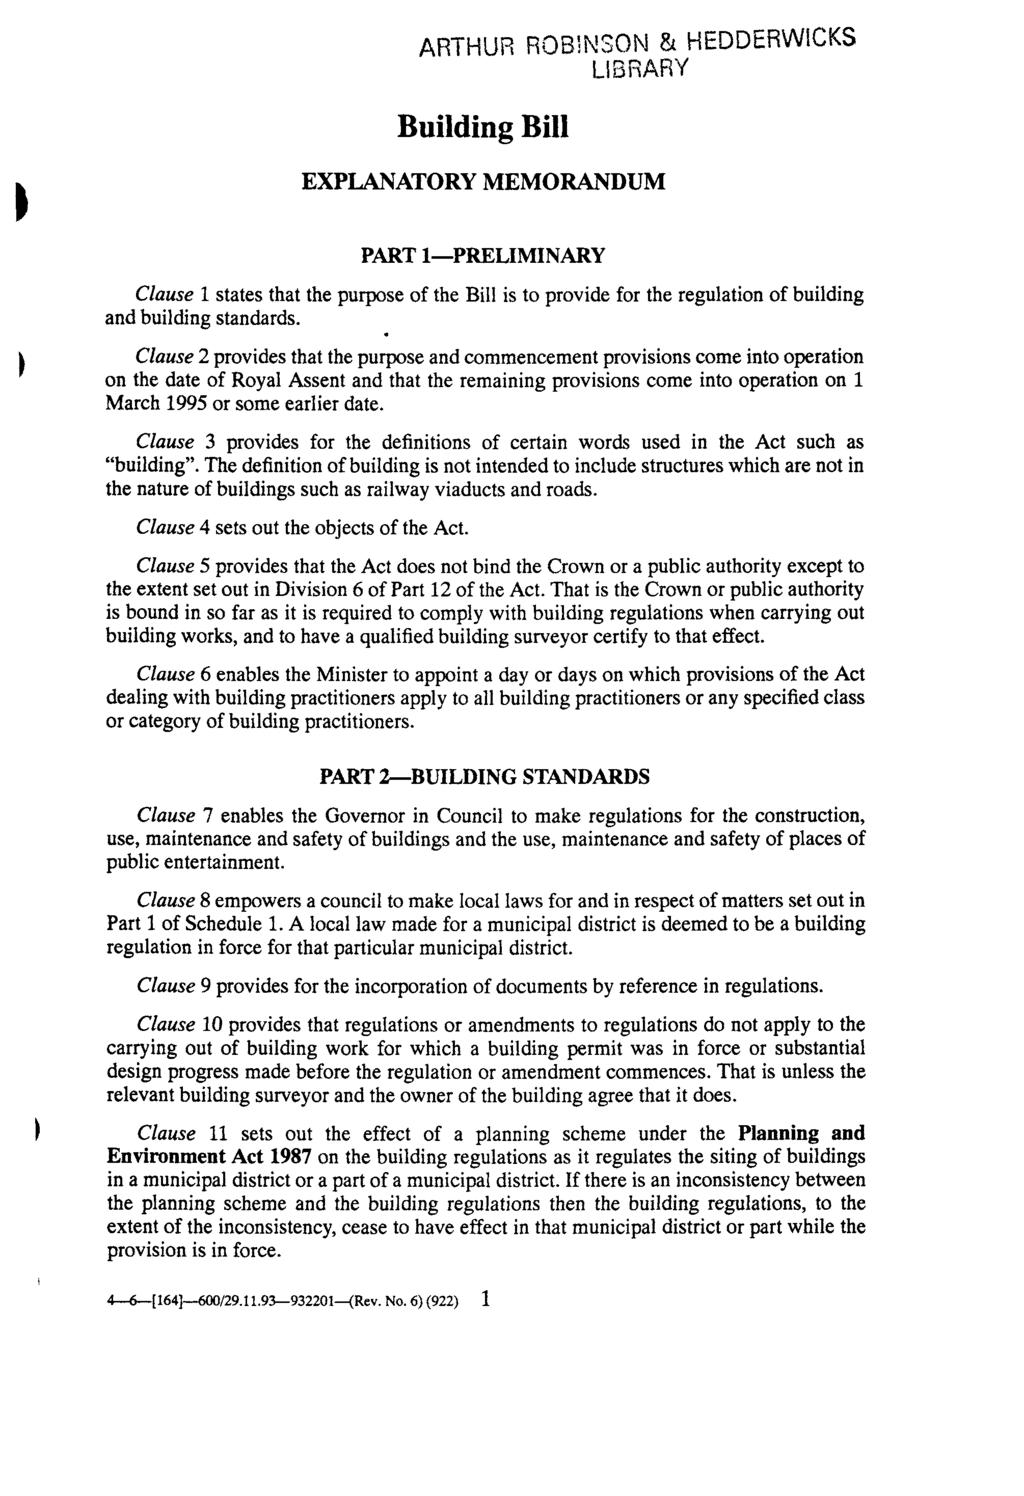 ARTHUR ROBINSON & HEDDERWICKS LIBRARY Building Bill EXPLANATORY MEMORANDUM PART I-PRELIMINARY Clause 1 states that the purpose of the Bill is to provide for the regulation of building and building